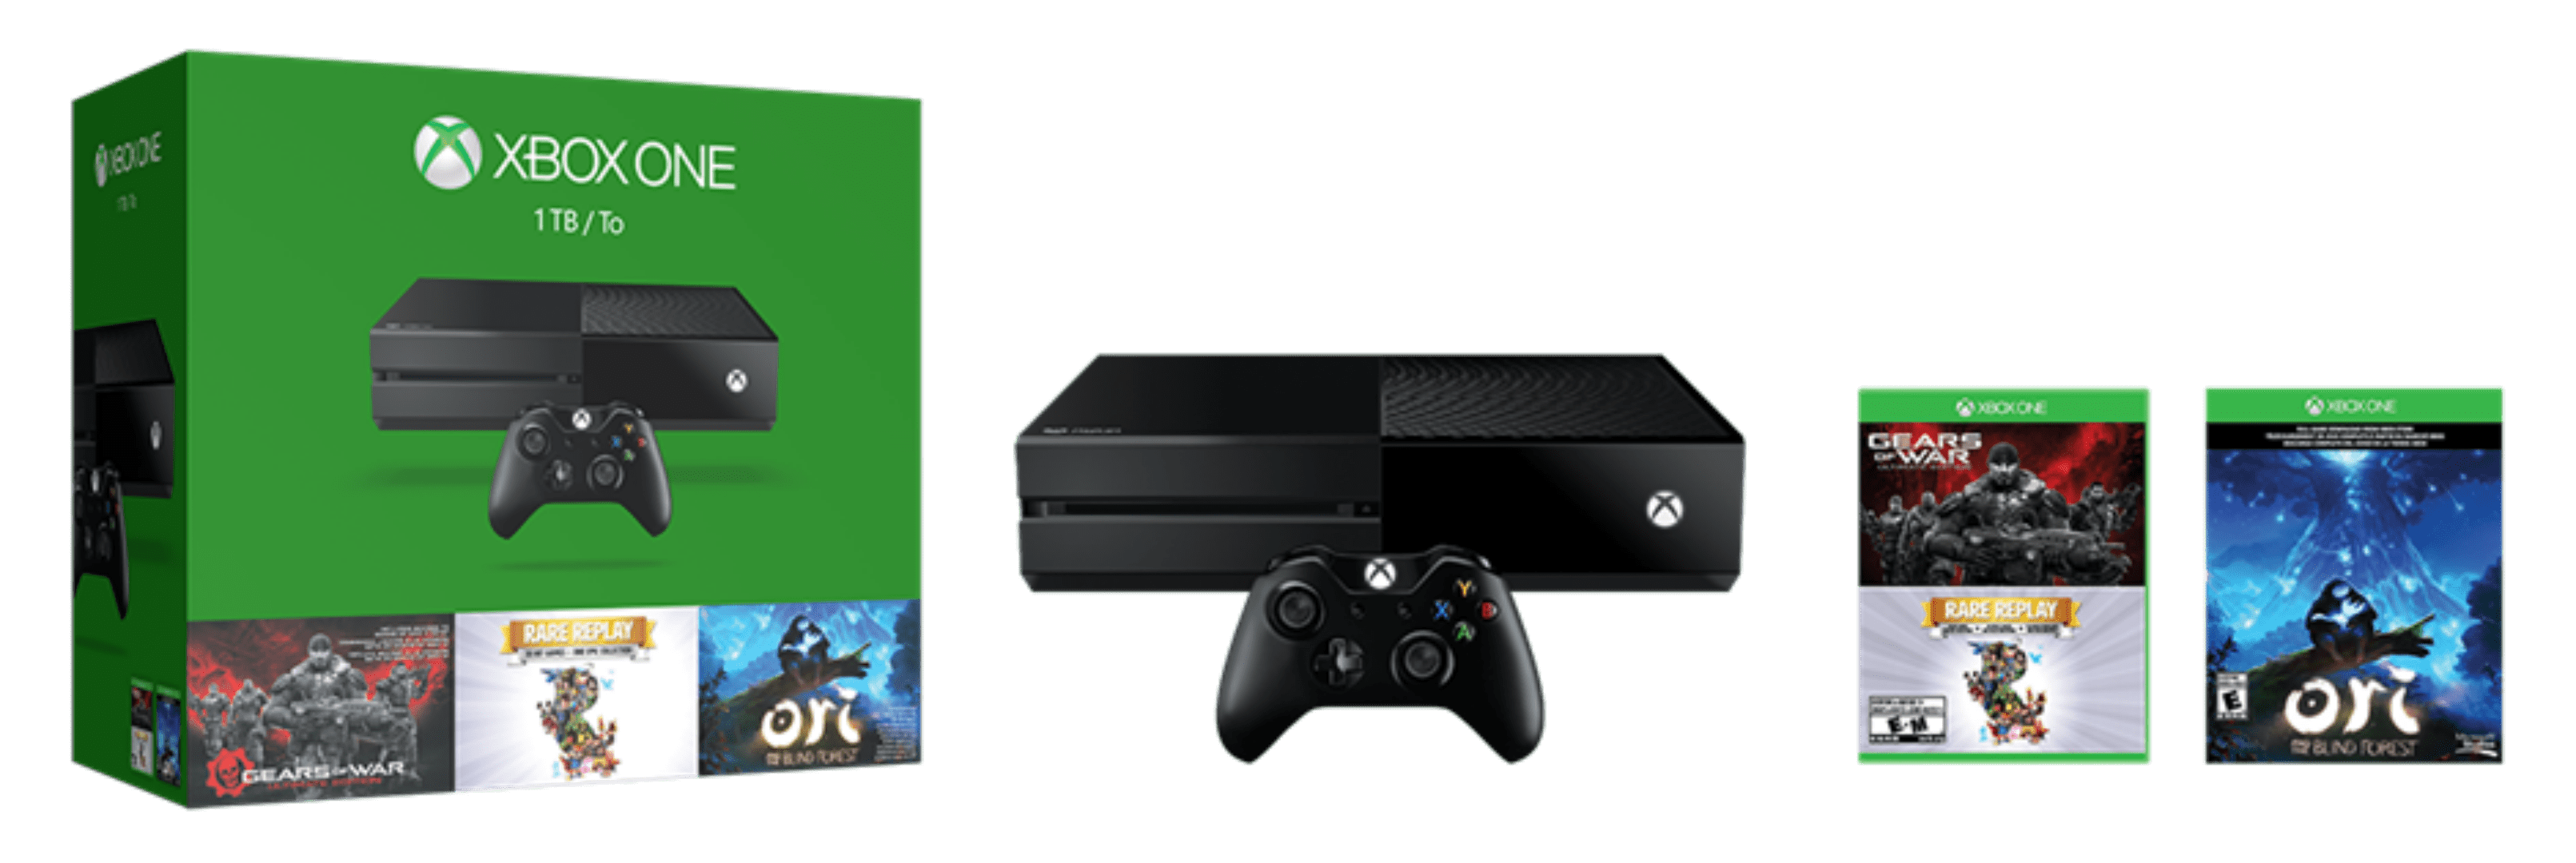 New Xbox One Bundle Features Gears Of War Collection And More!